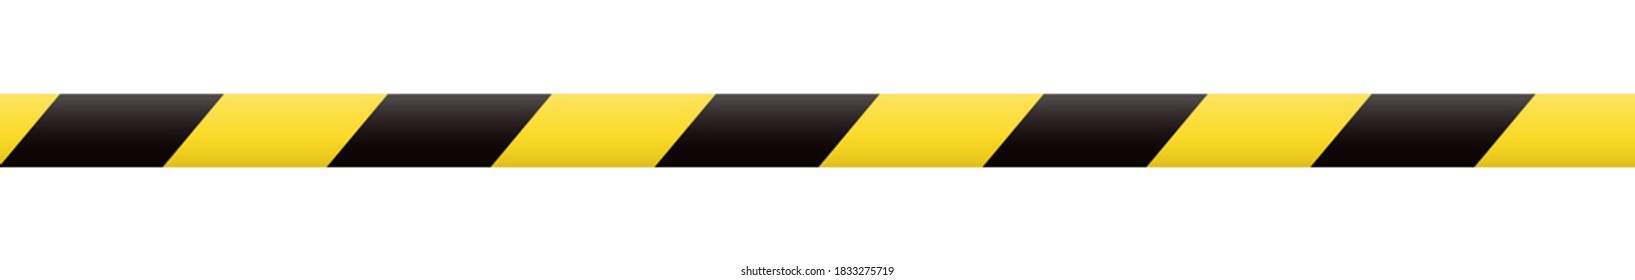 Barricade tape. Boundary line. Yellow and black barrier tape. Construction border